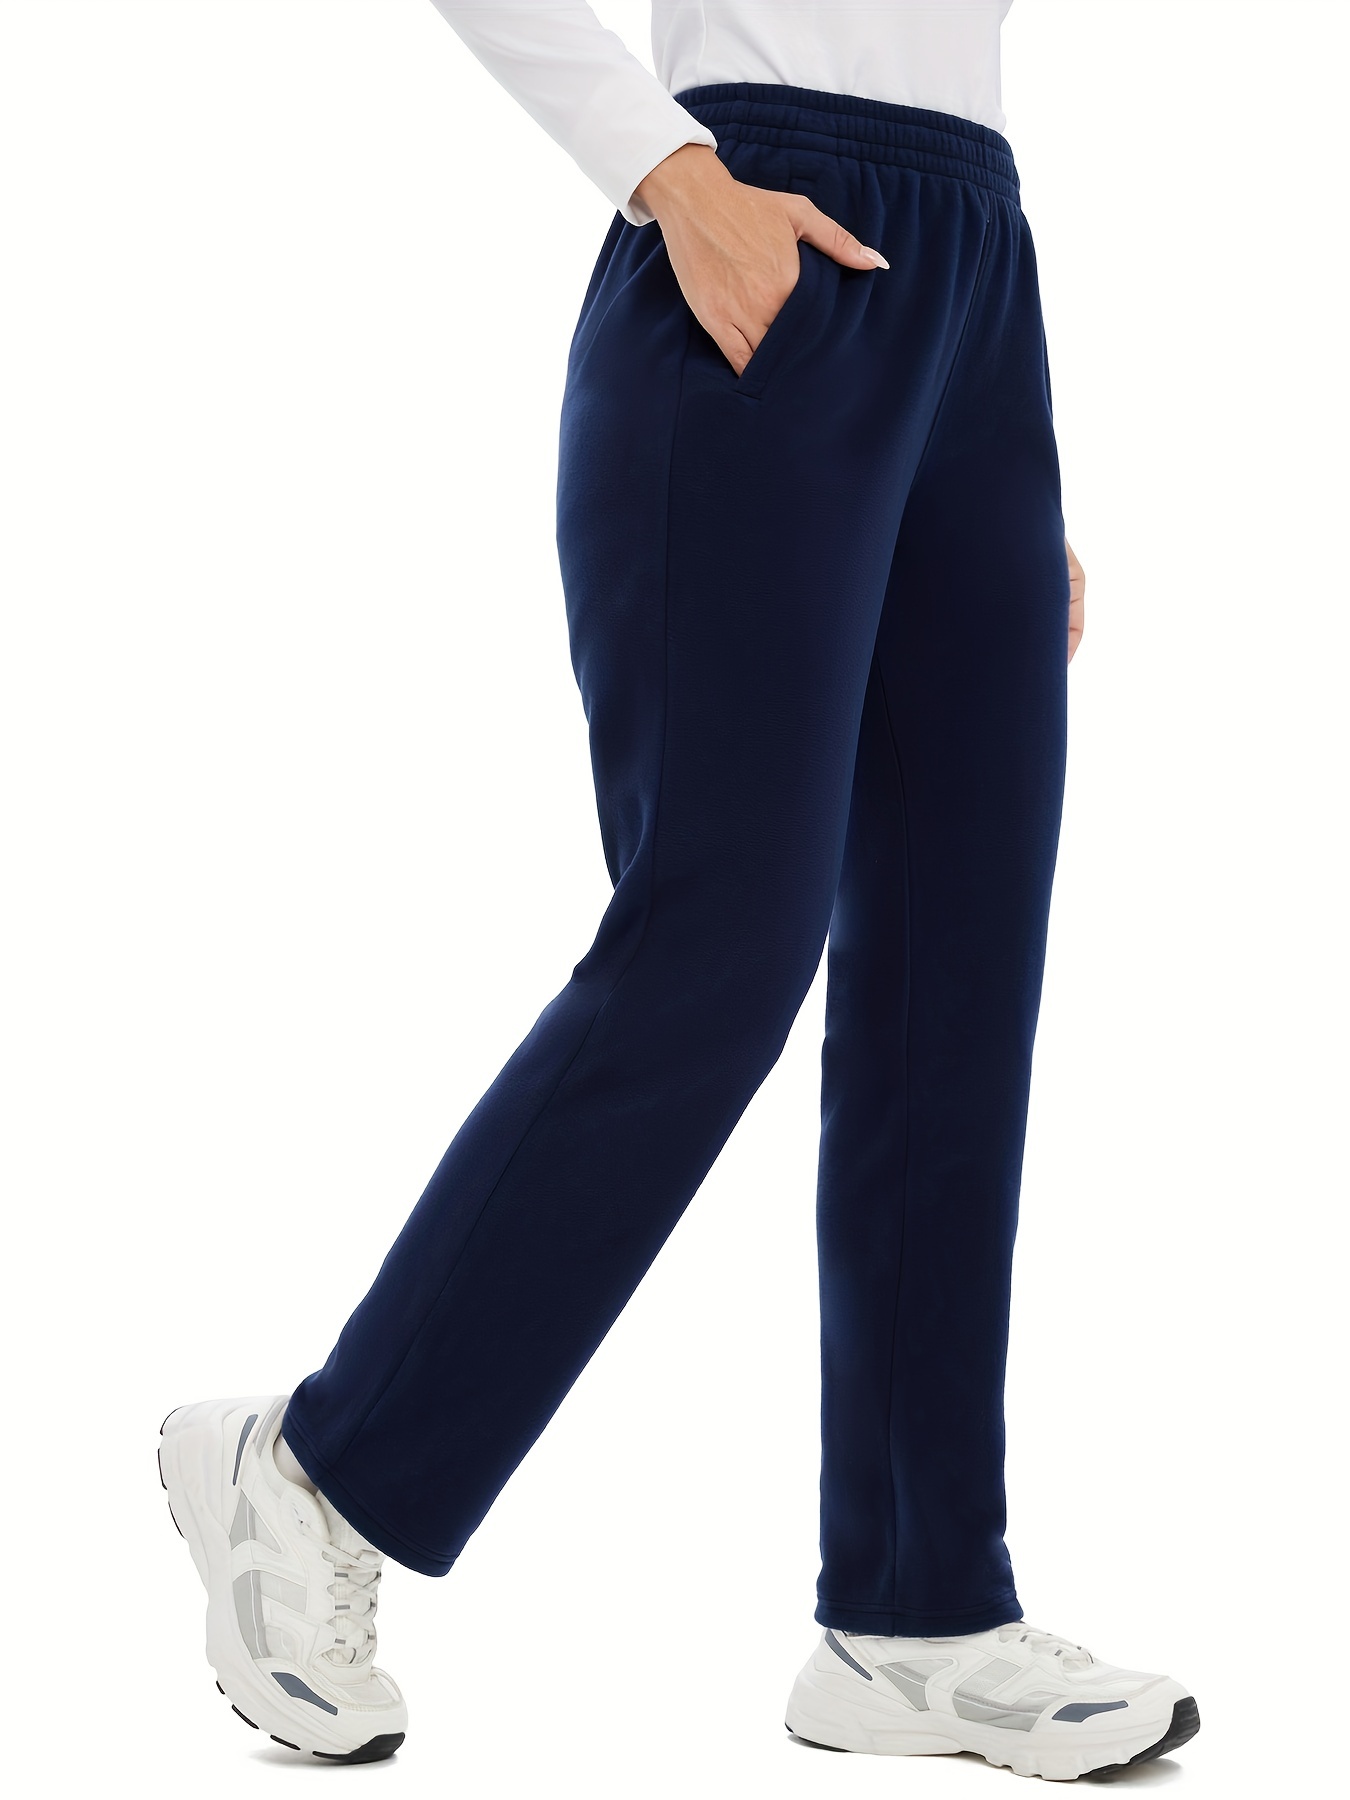 Womens Winter Fleece Lightweight Casual Sweatpants Elastic Cozy Long Pants  With Pocket, Shop The Latest Trends